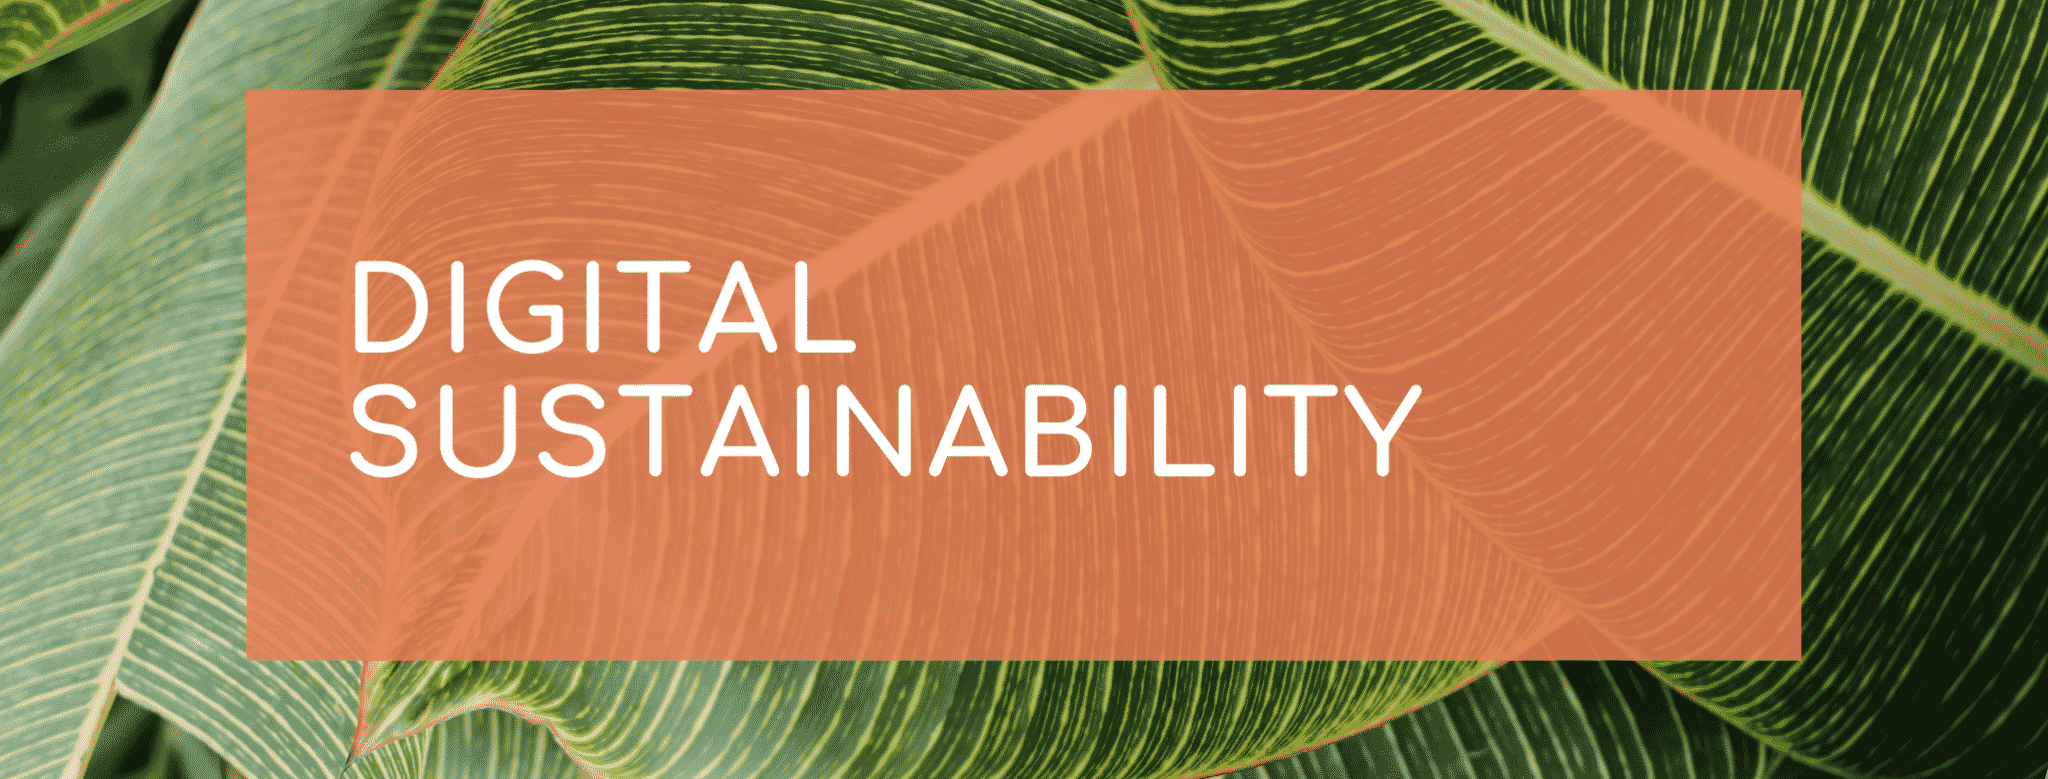 Digital Sustainability for small and micro businesses